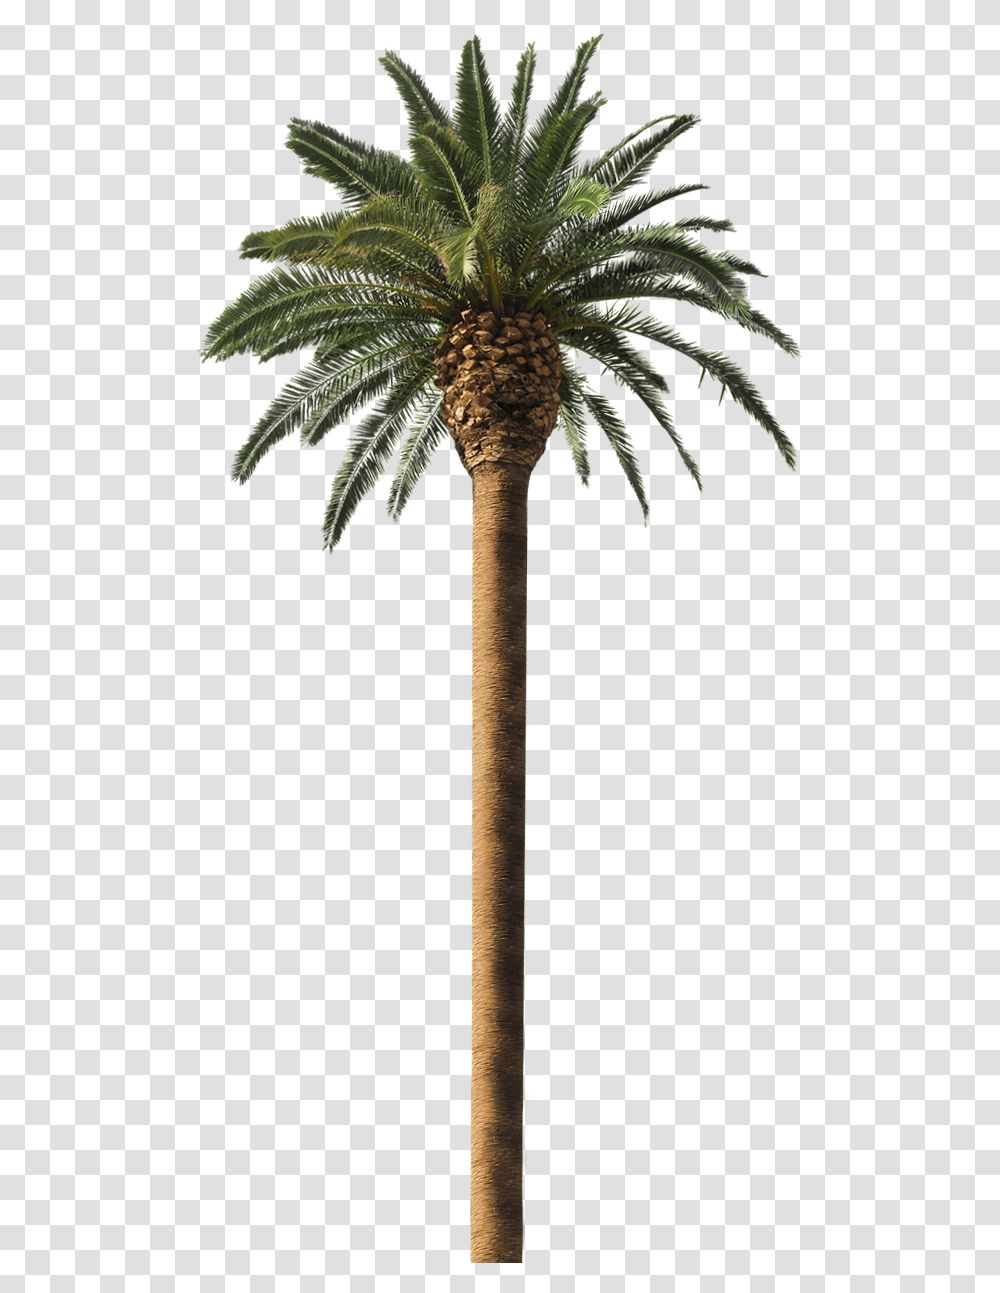 Trees Similar To Coconut Tree Similar To Coconut Tree, Plant, Palm Tree, Arecaceae, Fir Transparent Png